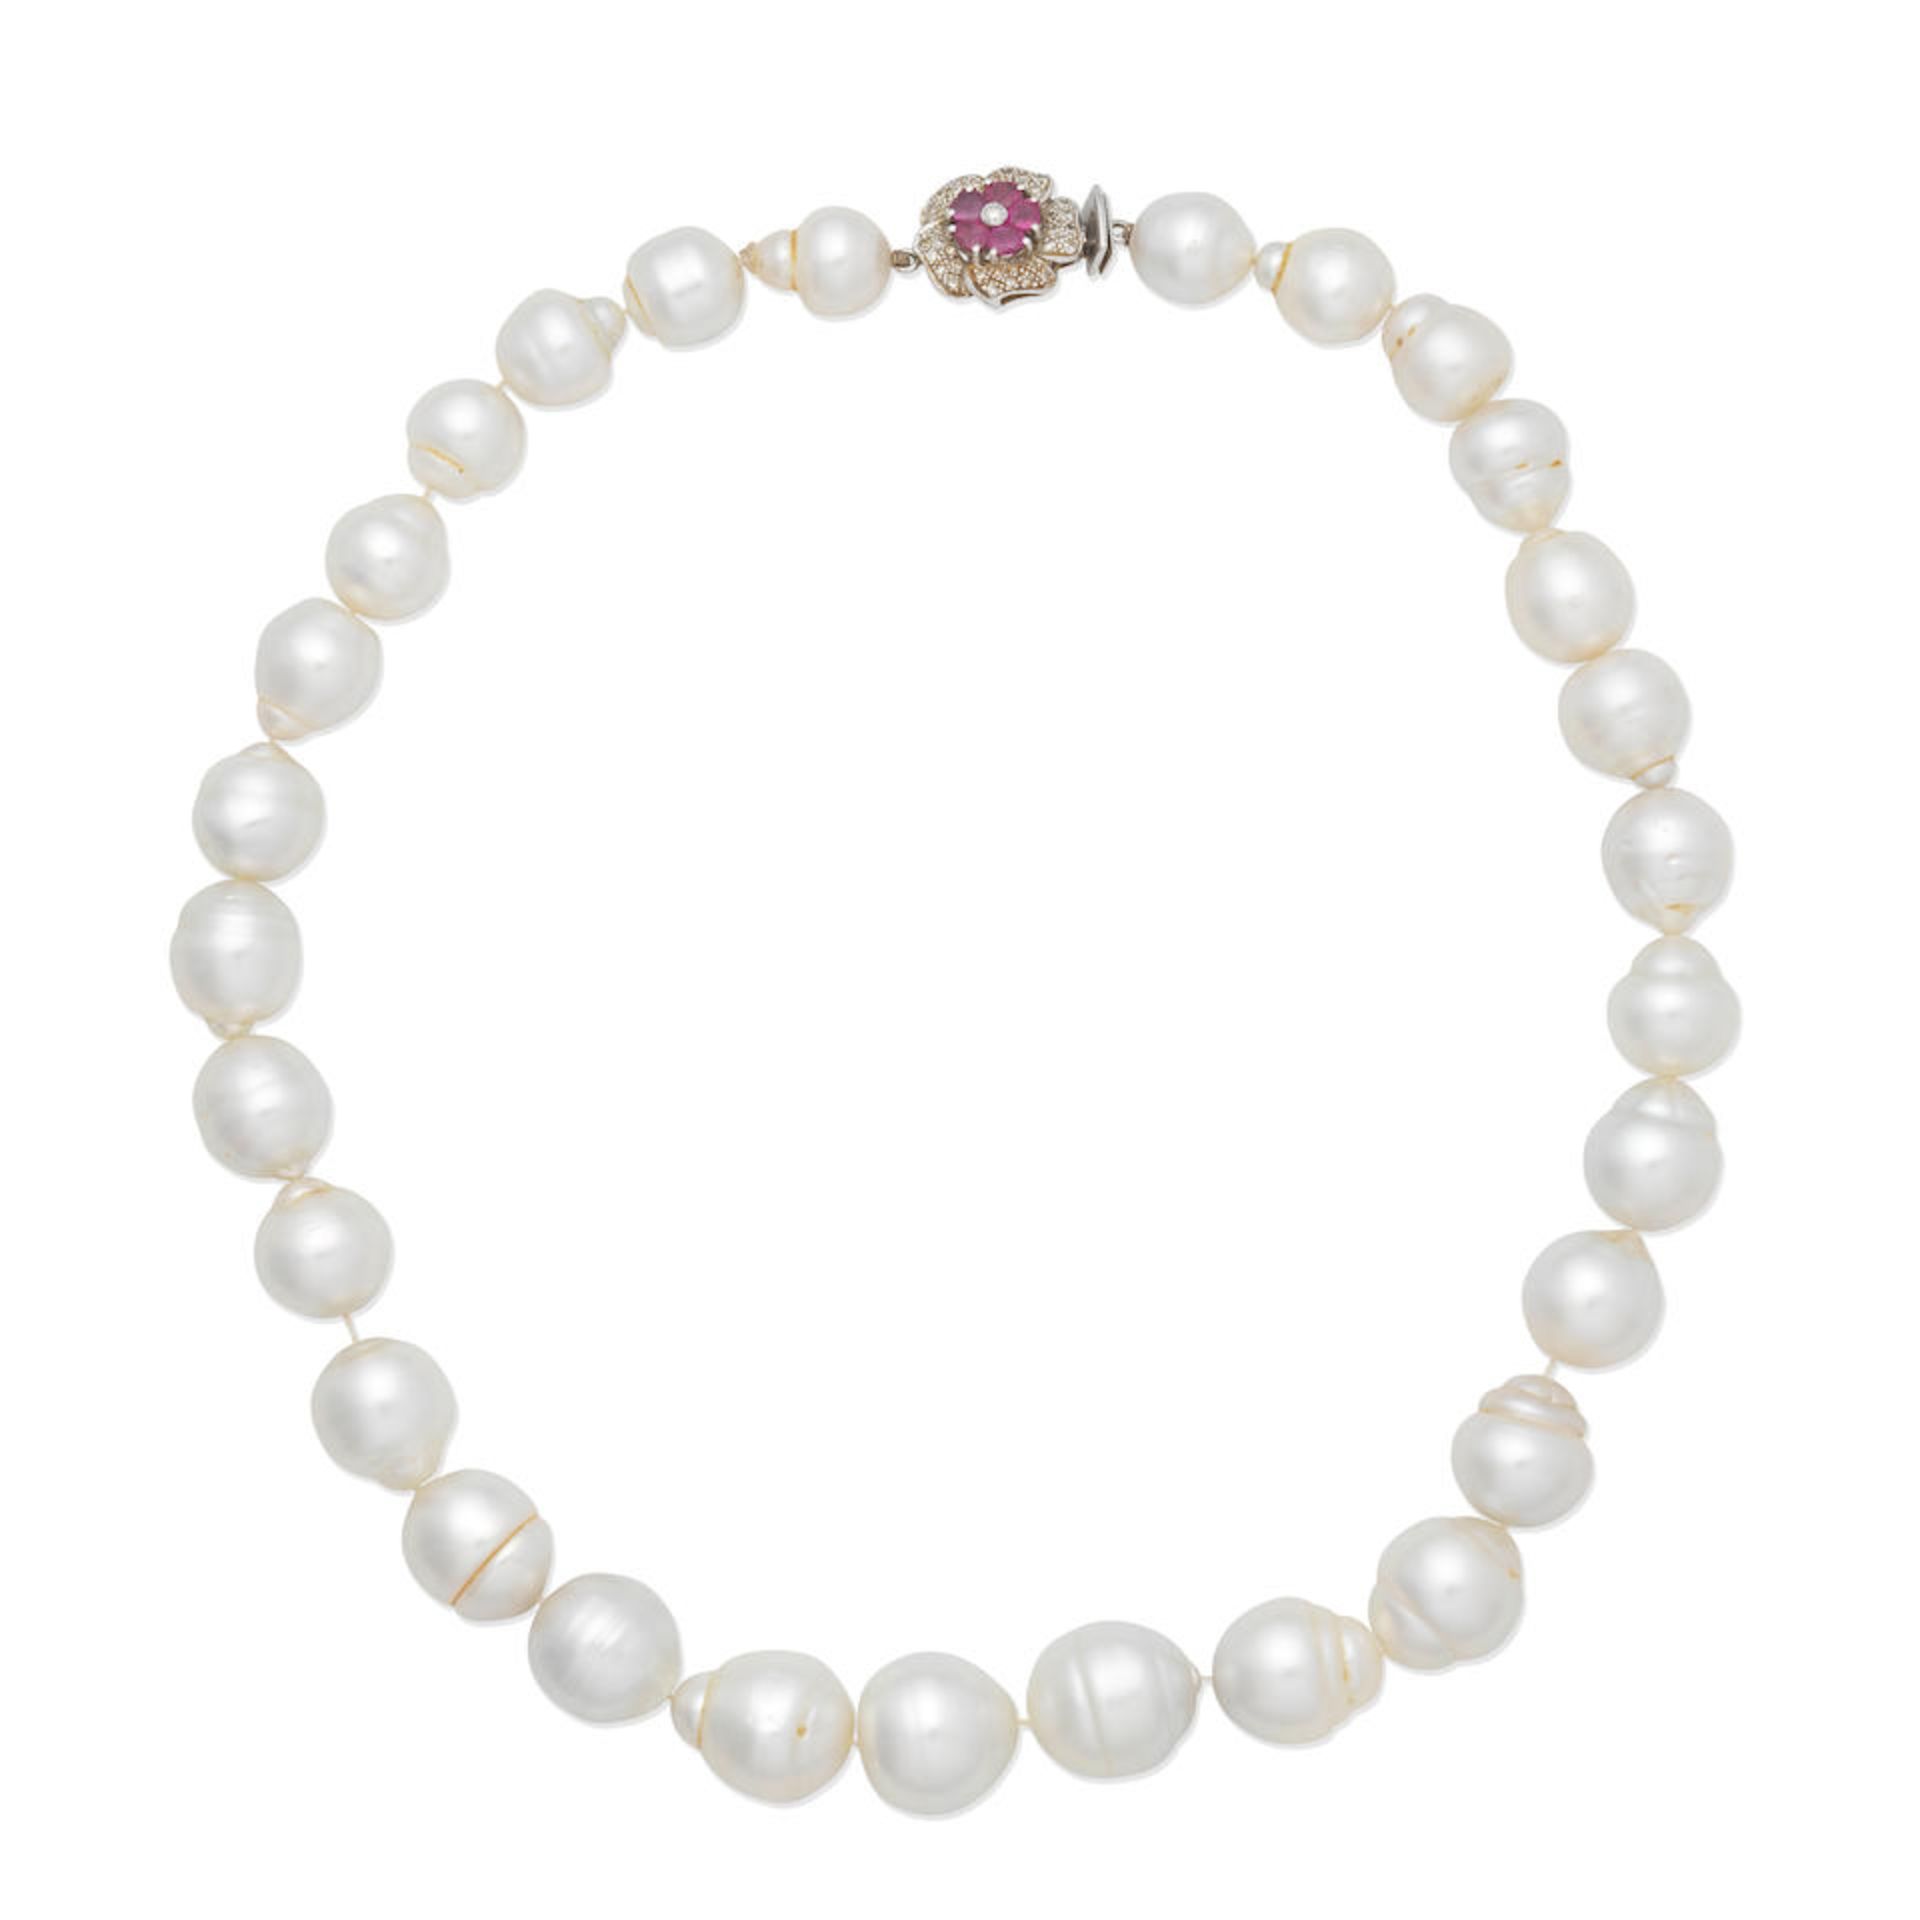 BAROQUE CULTURED PEARL NECKLACE WITH GEM-SET CLASP